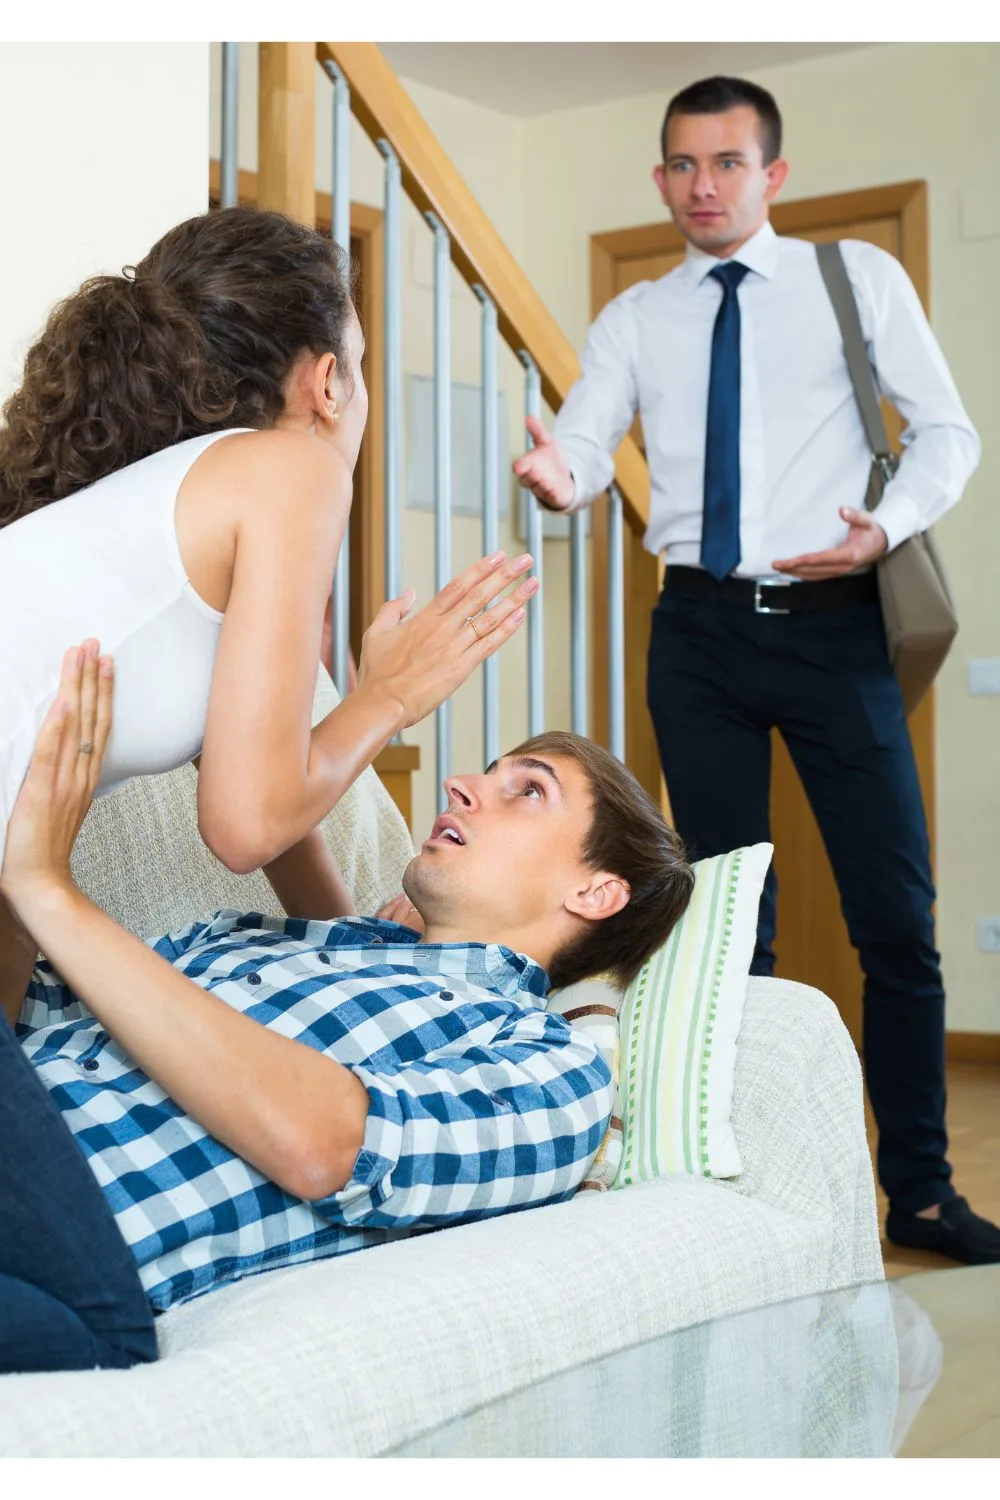 How Friends Destroy Marriages: 10 Careless Ways Friends Can Ruin Your Home